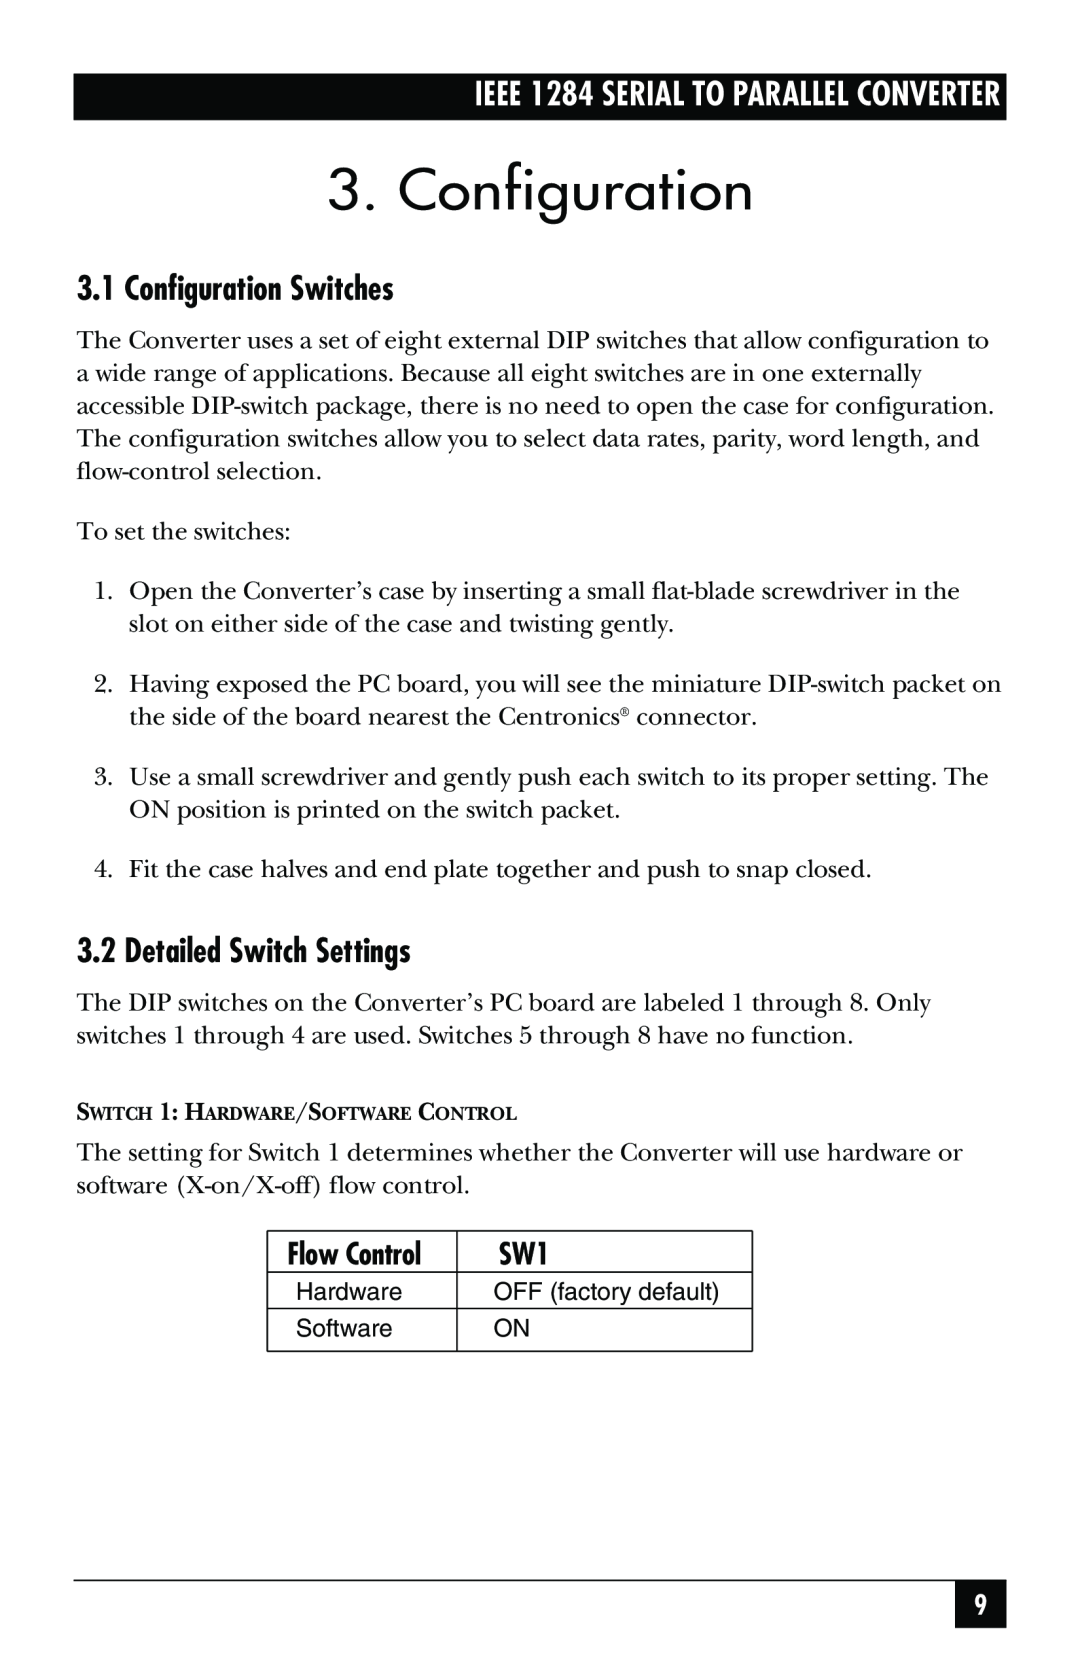 Black Box IEEE 1284 manual 3.1Configuration Switches, Detailed Switch Settings, Flow Control 